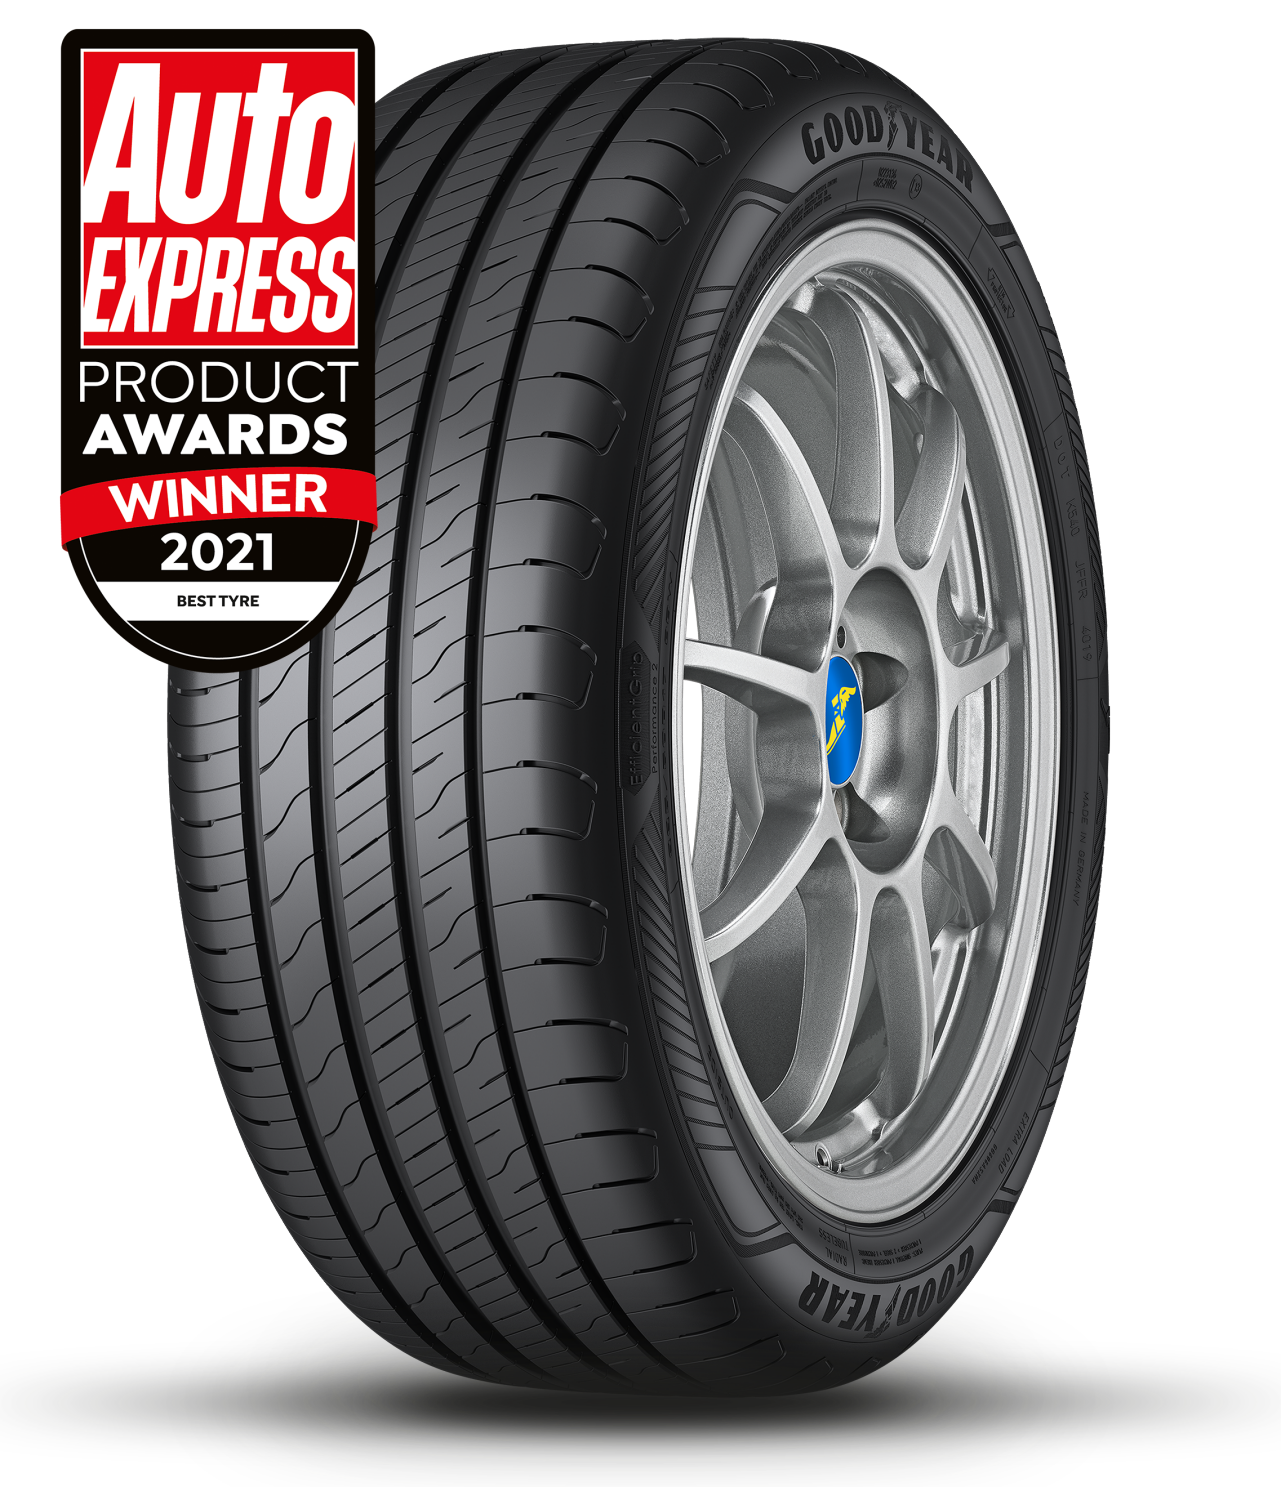 Goodyear EfficientGrip Performance 2 - Auto Express Product Award Winner 2021 for Summer Tyre Category in the UK